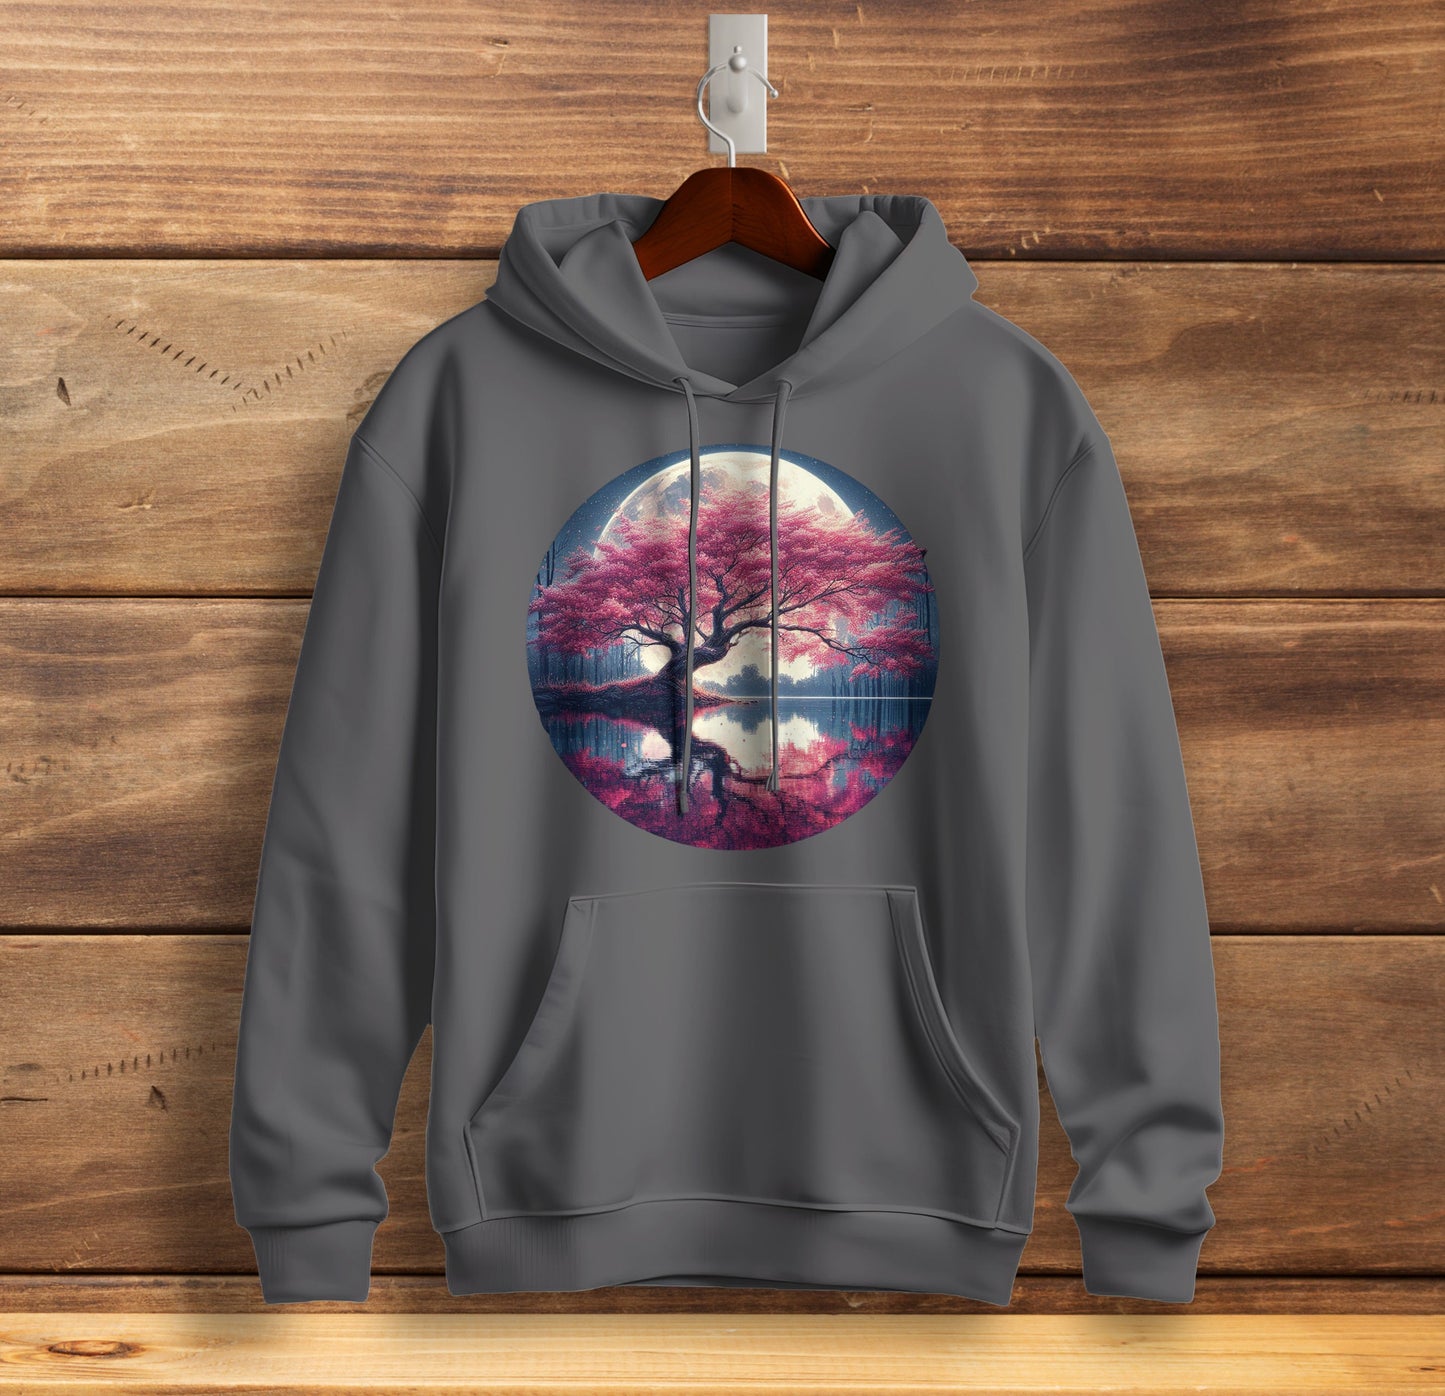 The Cherry Blossom - Full Moon Graphic Printed Hooded Sweat Shirt for Men - Cotton - Cosmos Sweat Shirt